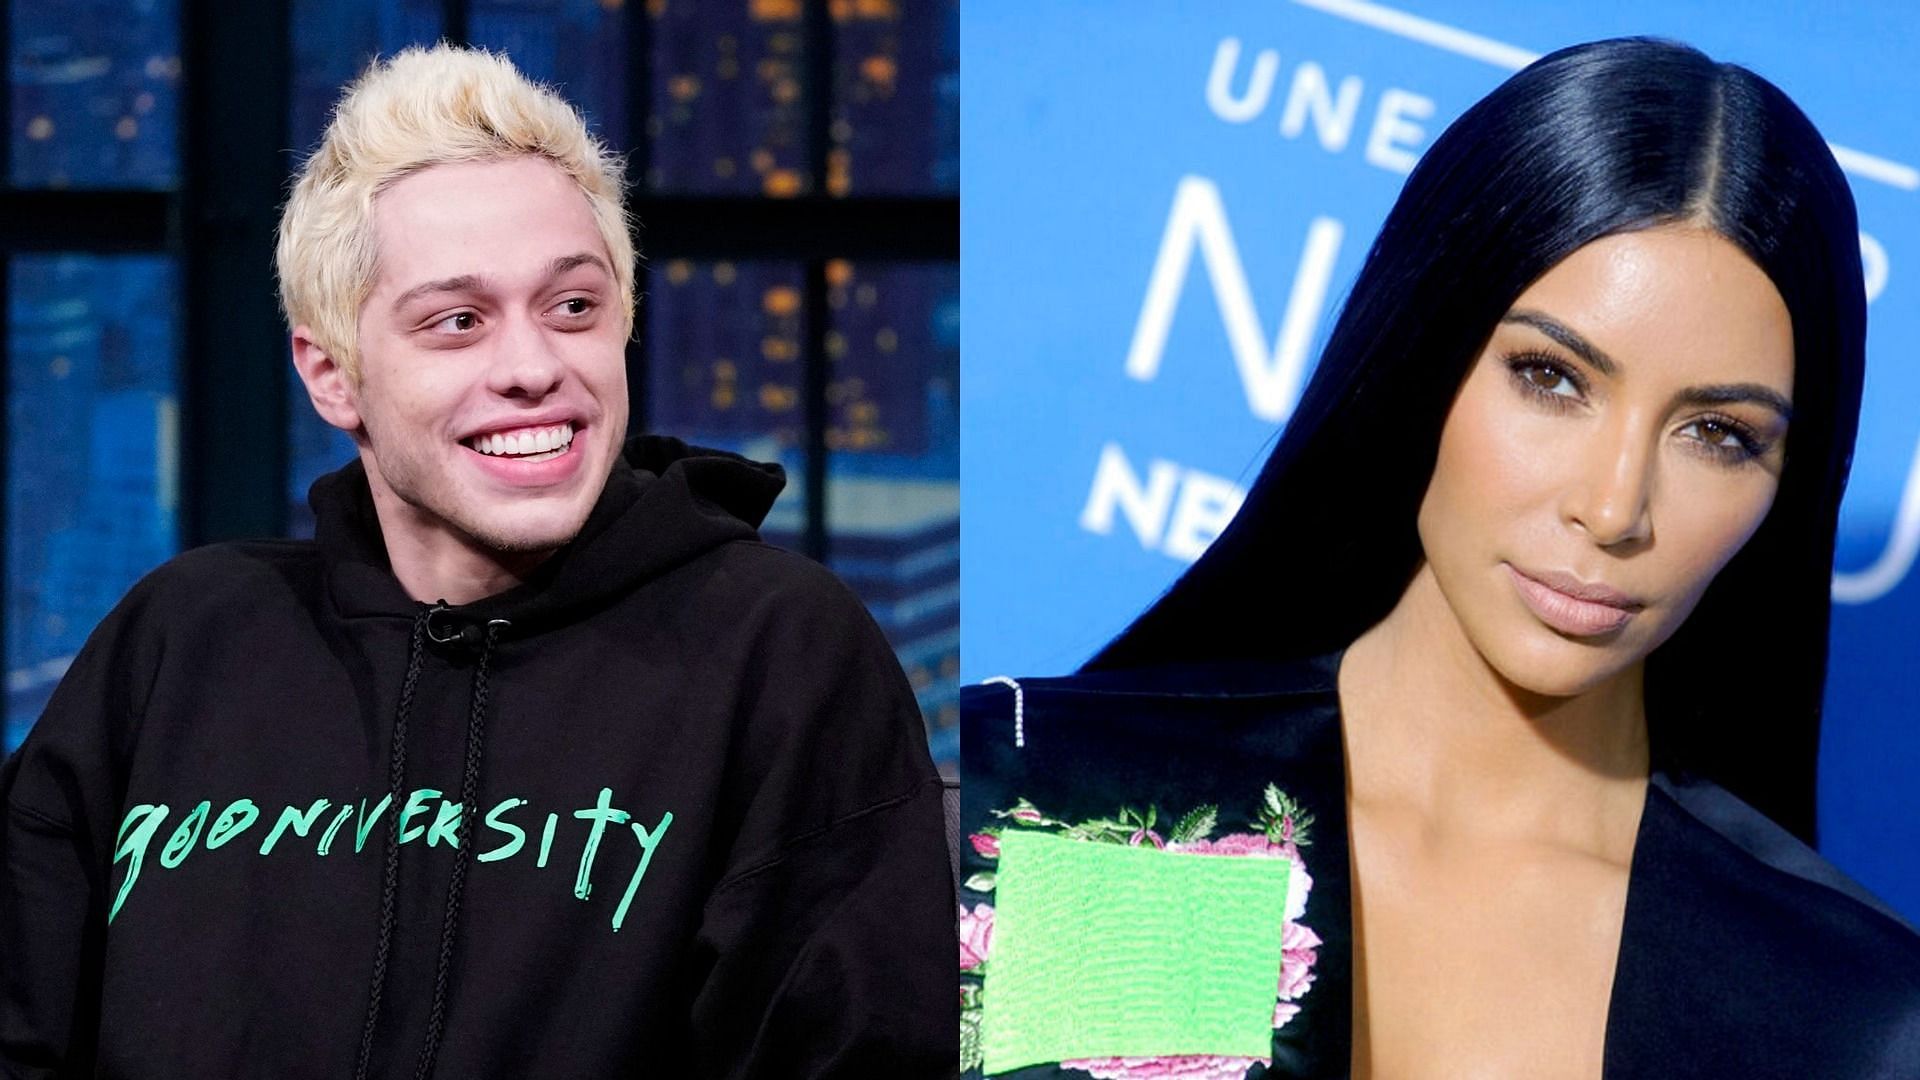 Pete Davidson and Kim Kardashian sparked dating rumors after their SNL appearance (Image via Getty Images)